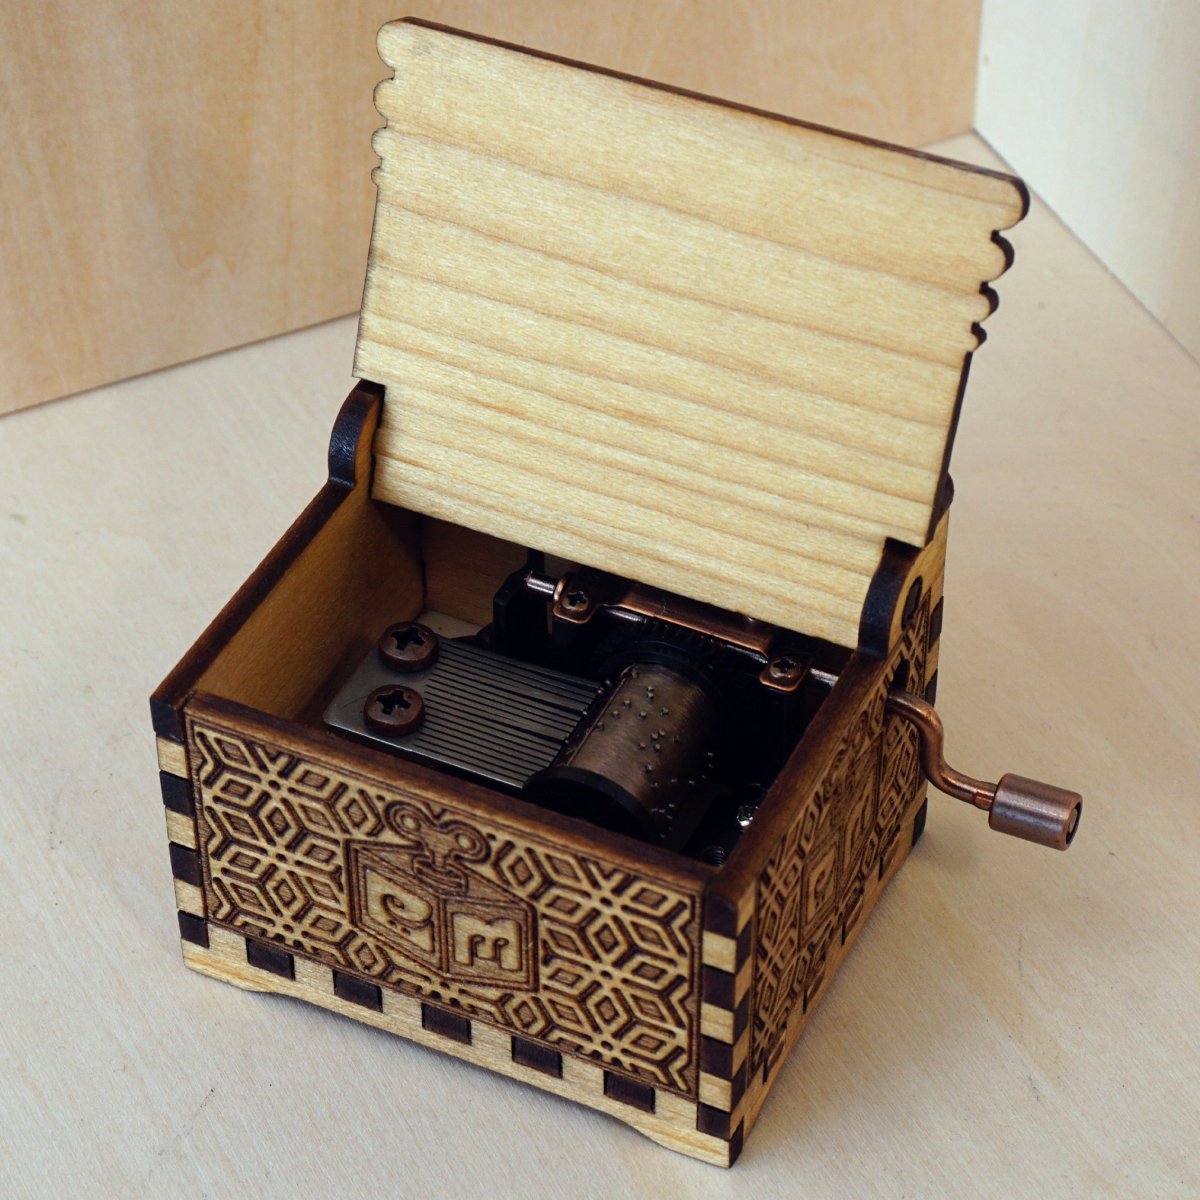 Hand-cranked music box in illustrated cardboard made by Belle Lurette -  Item# of this hand-cranked